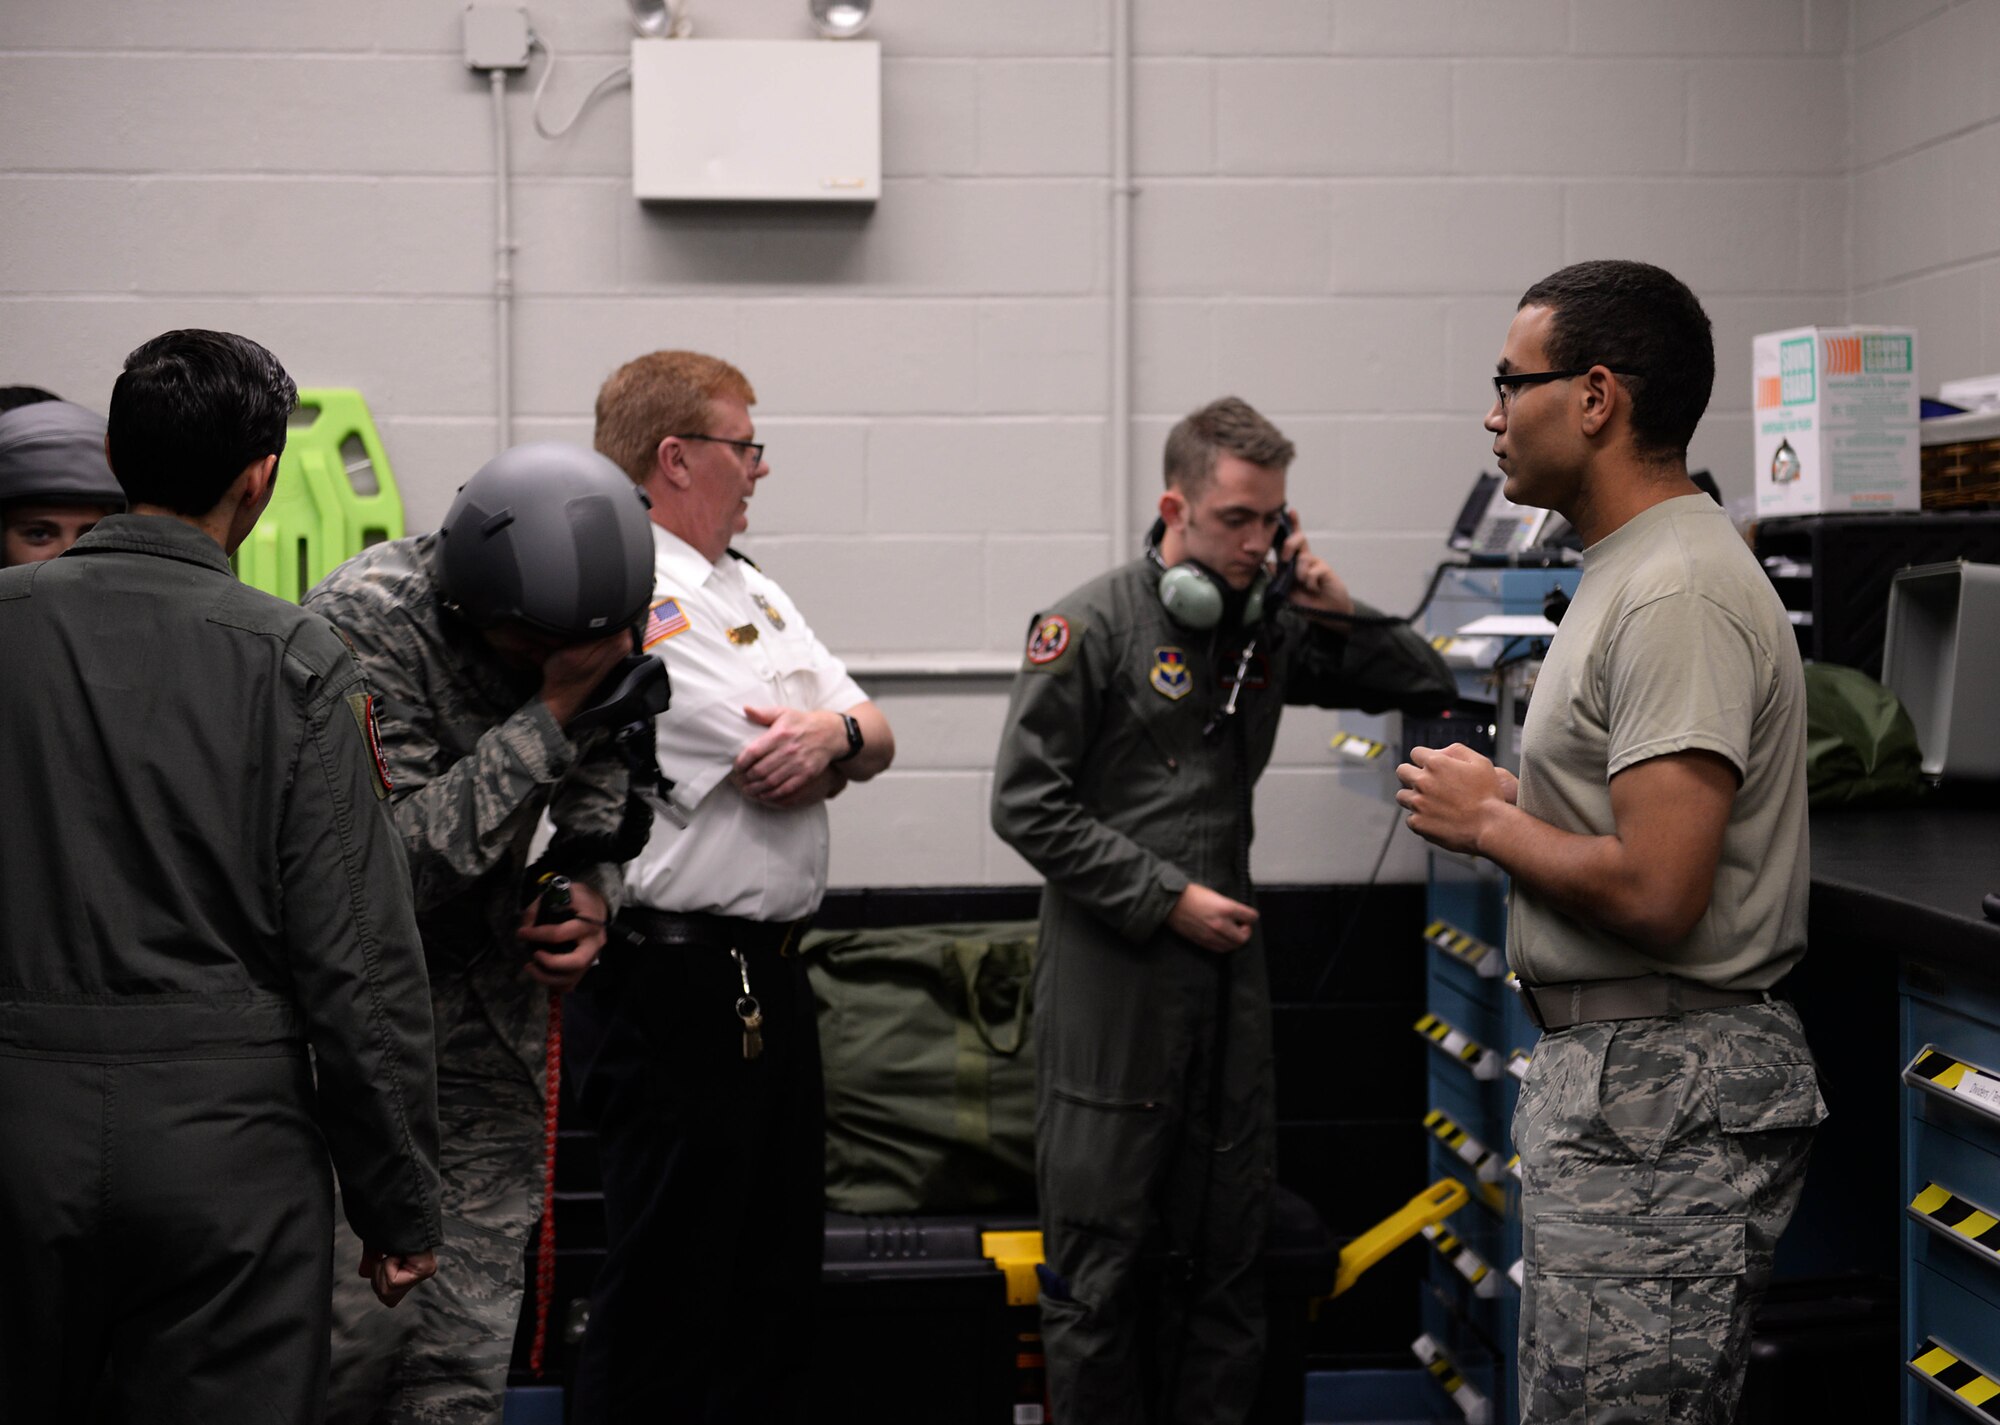 Airmen are escorted outside the Hyperbaric Chamber Room during a simulated chamber flight Sept. 3, 2019, on Columbus Air Force Base, Miss. A simulated fire began in the room, causing Airmen to immediately evacuate the building and Hyperbaric Chamber Room. (U.S. Air Force photo by Airman 1st Class Hannah Bean)